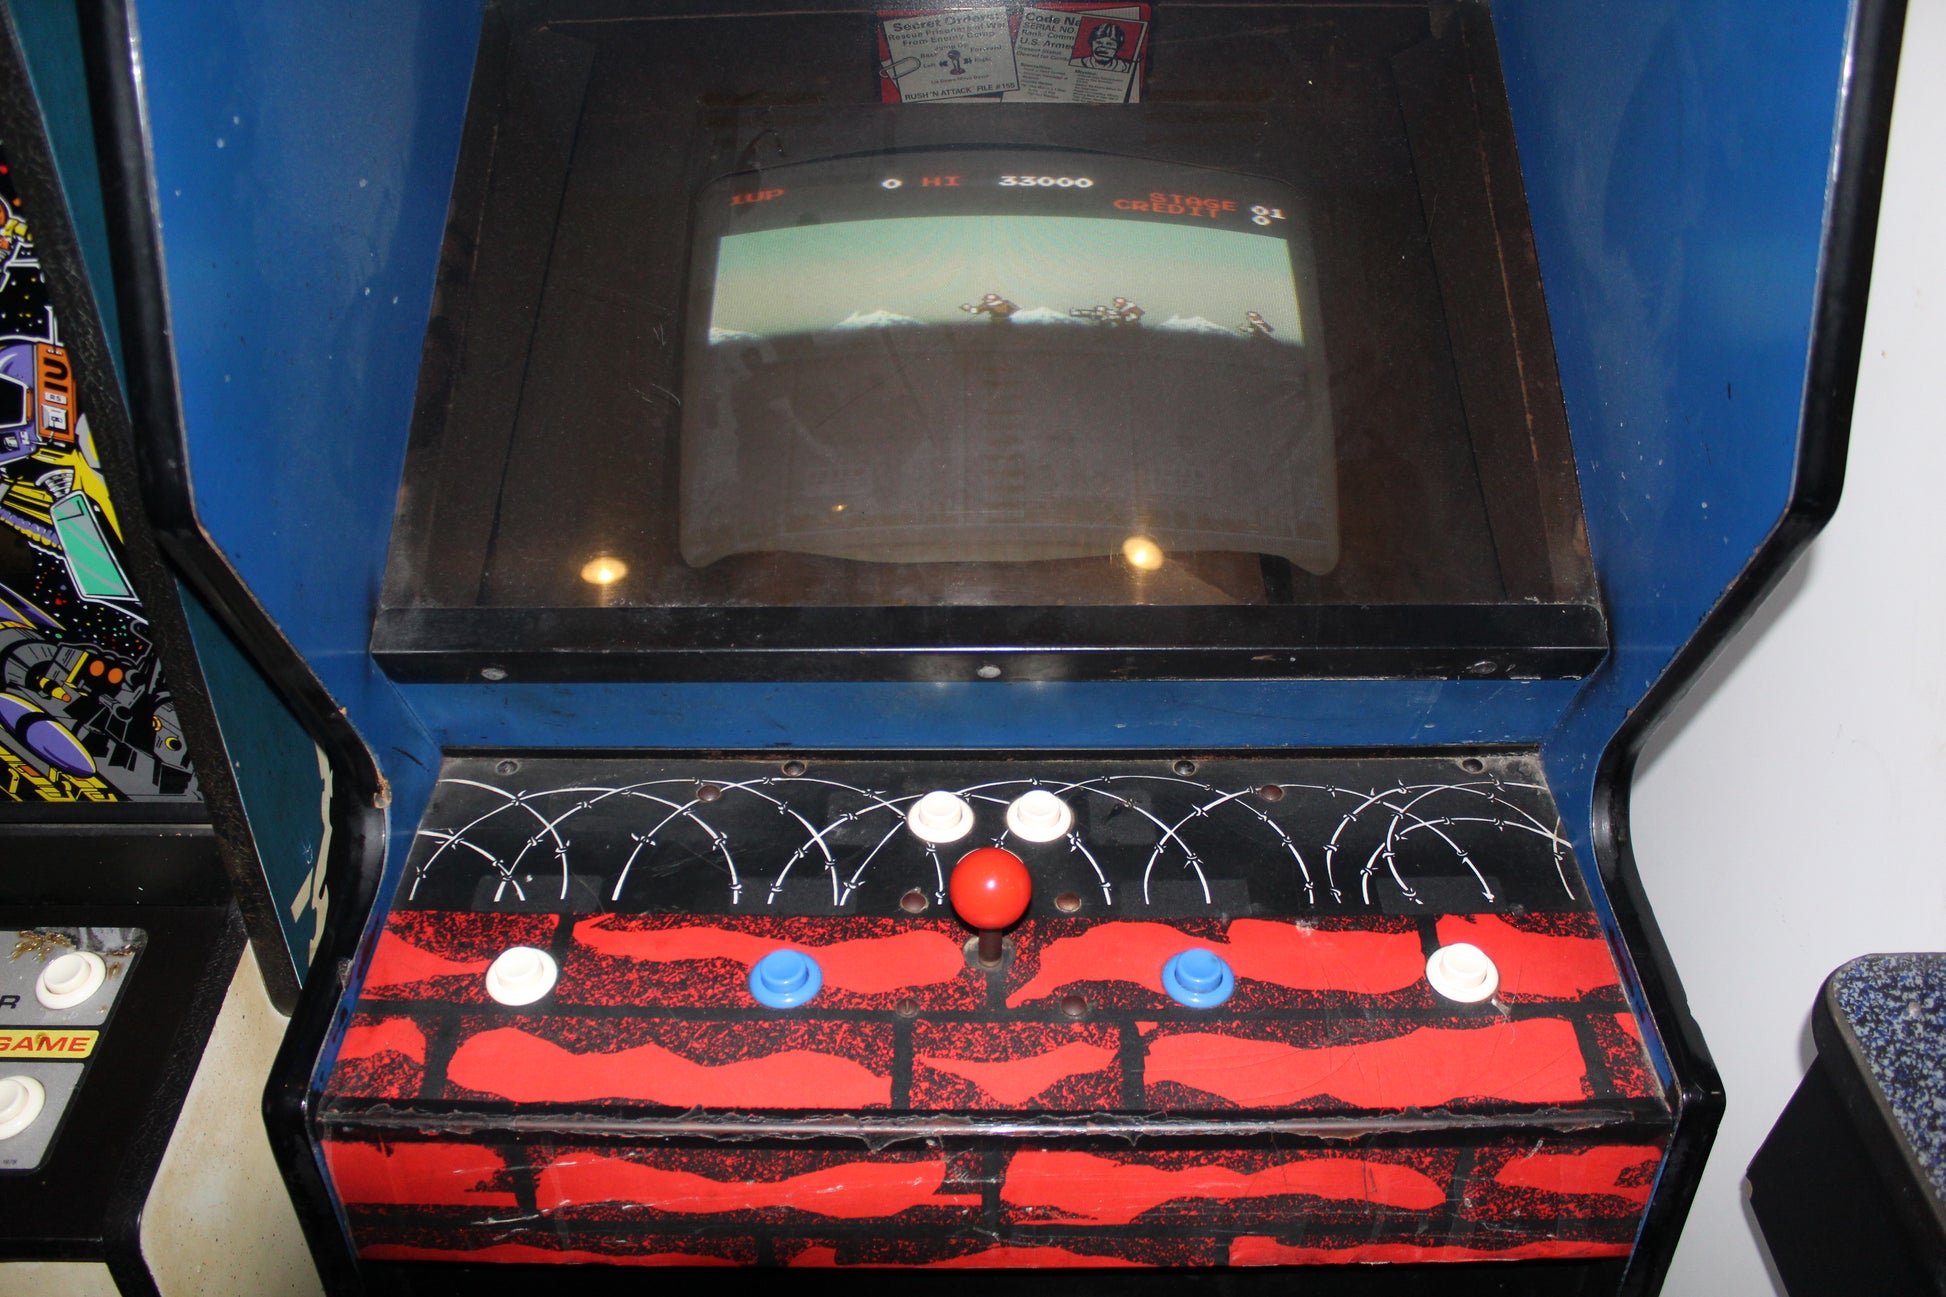 Rush N Attack Arcade Cabinet – Records and Rarities